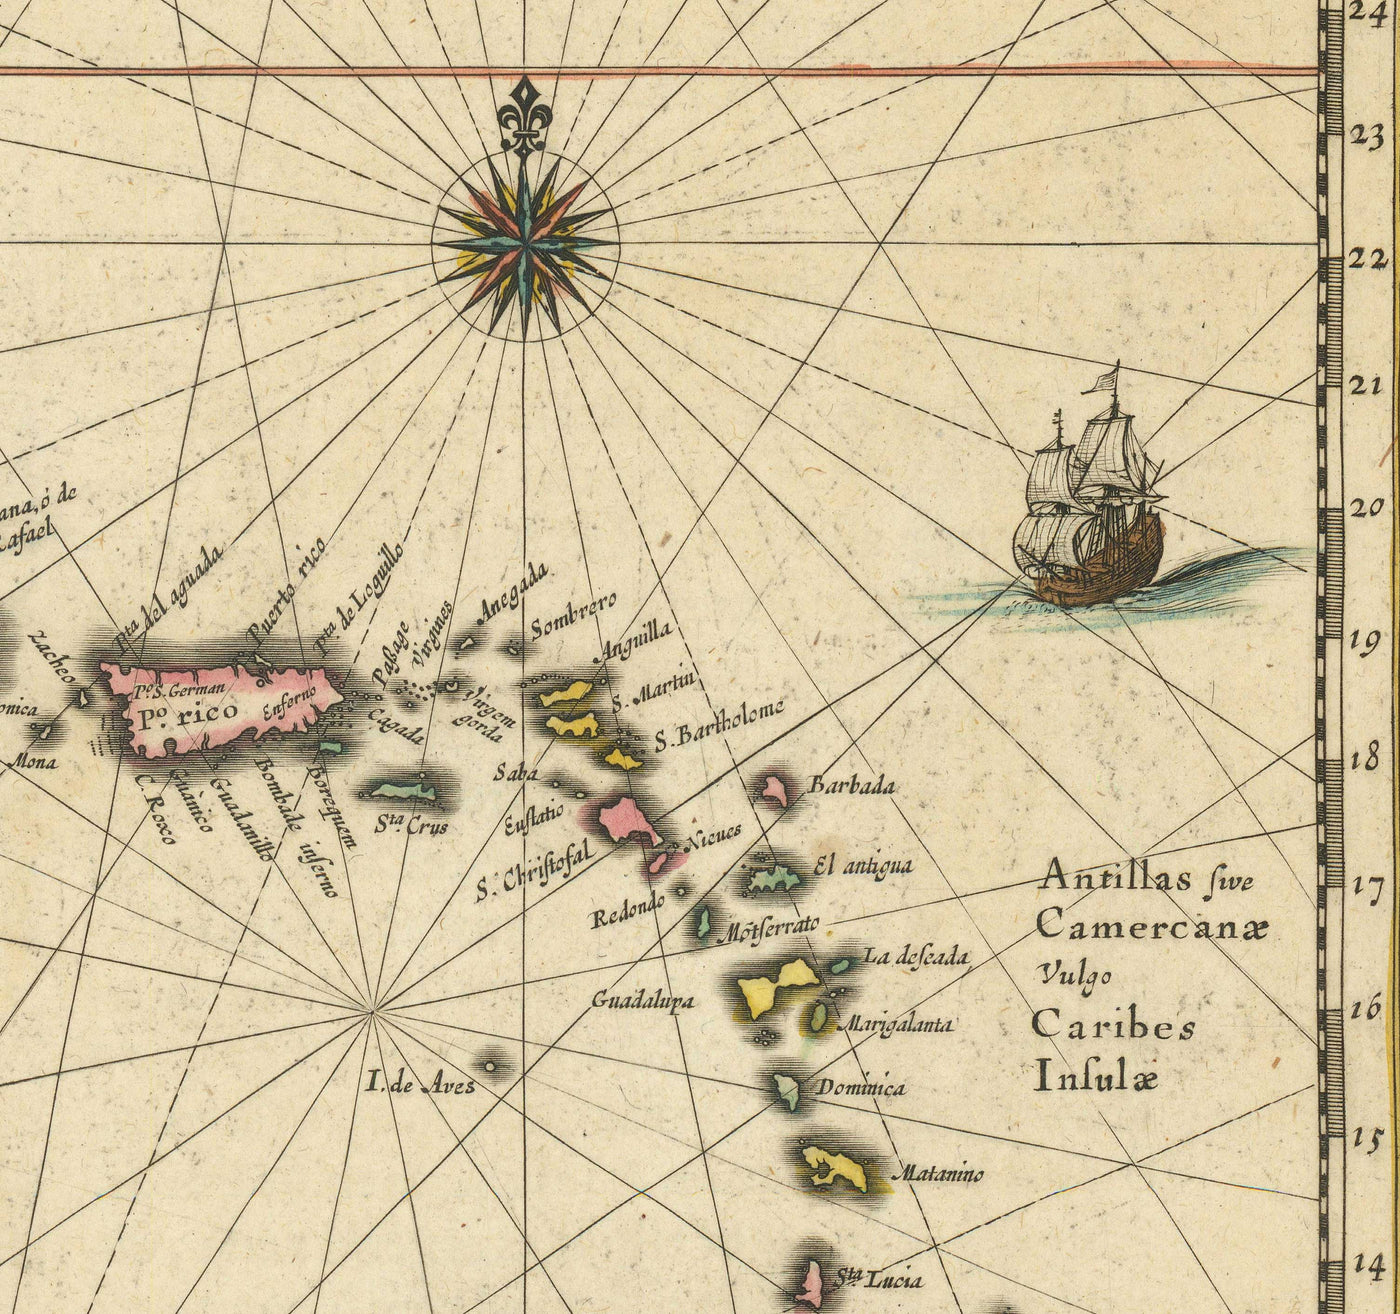 Old Map of the Caribbean in 1640 by Willem Blaeu - Cuba, Jamaica, Dominican Republic, Puerto Rico, The Bahamas